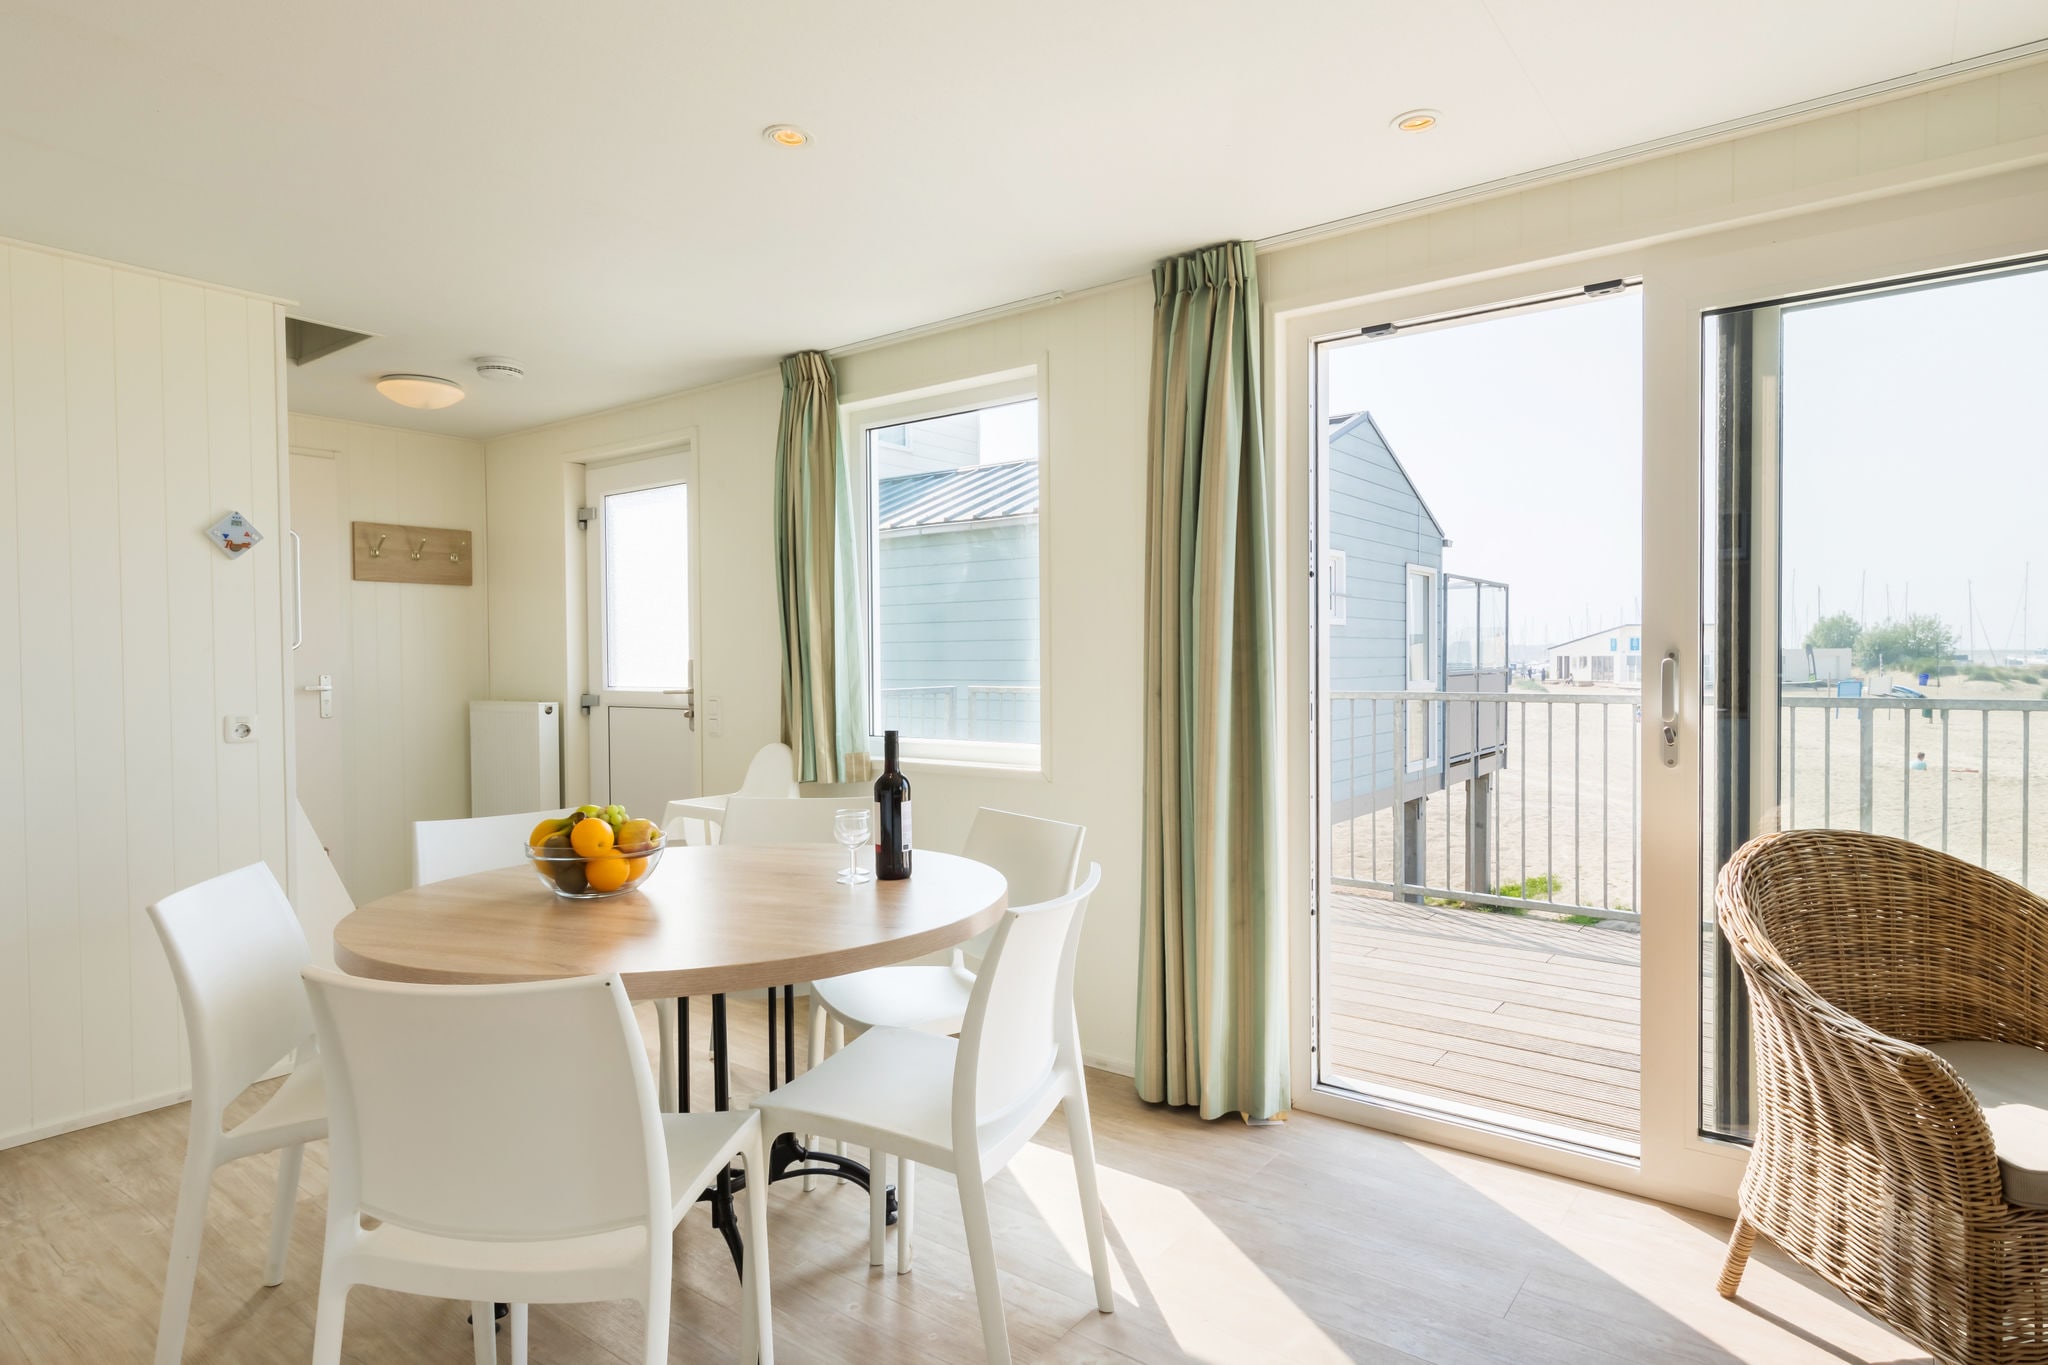 Unique beach house with dishwasher and beautiful view, in a holiday park